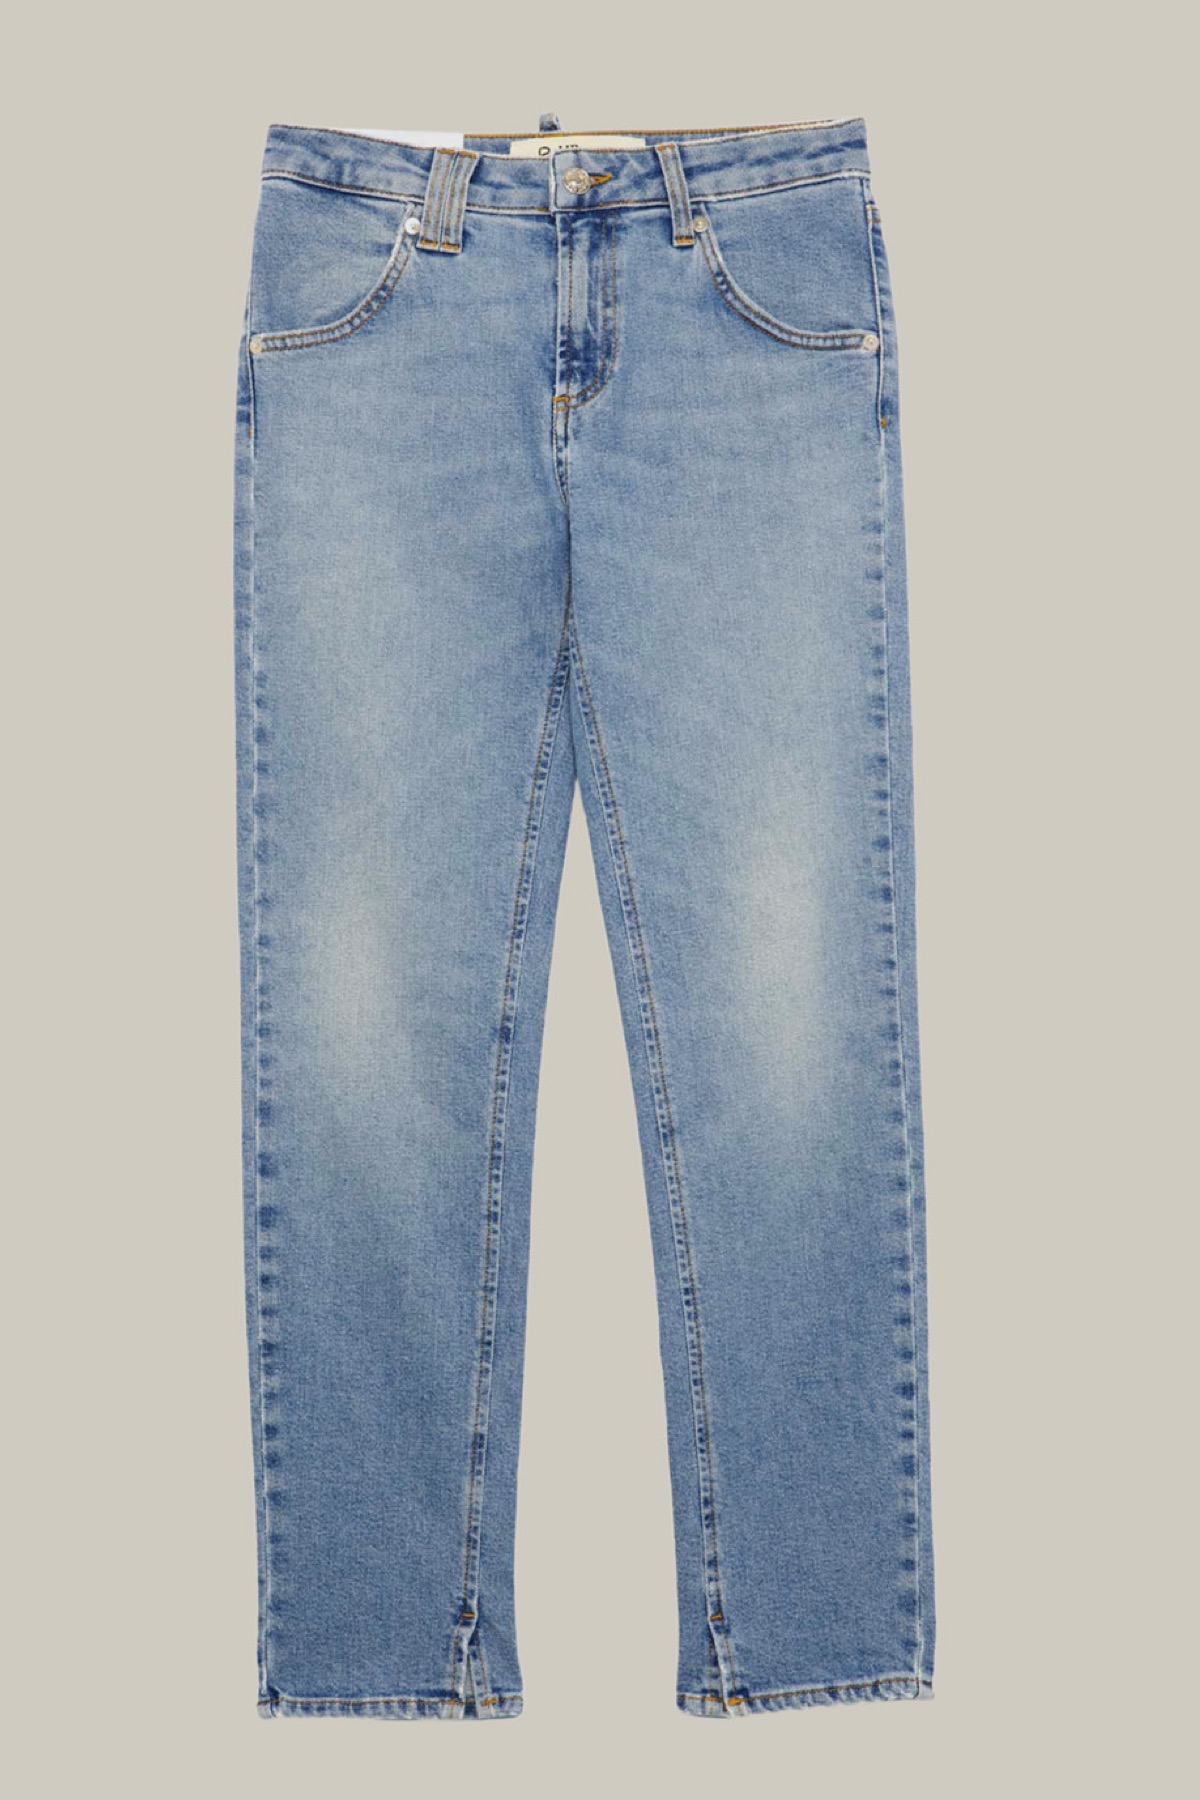 JEANS NEW ELIONOR/815 ROY ROGERS